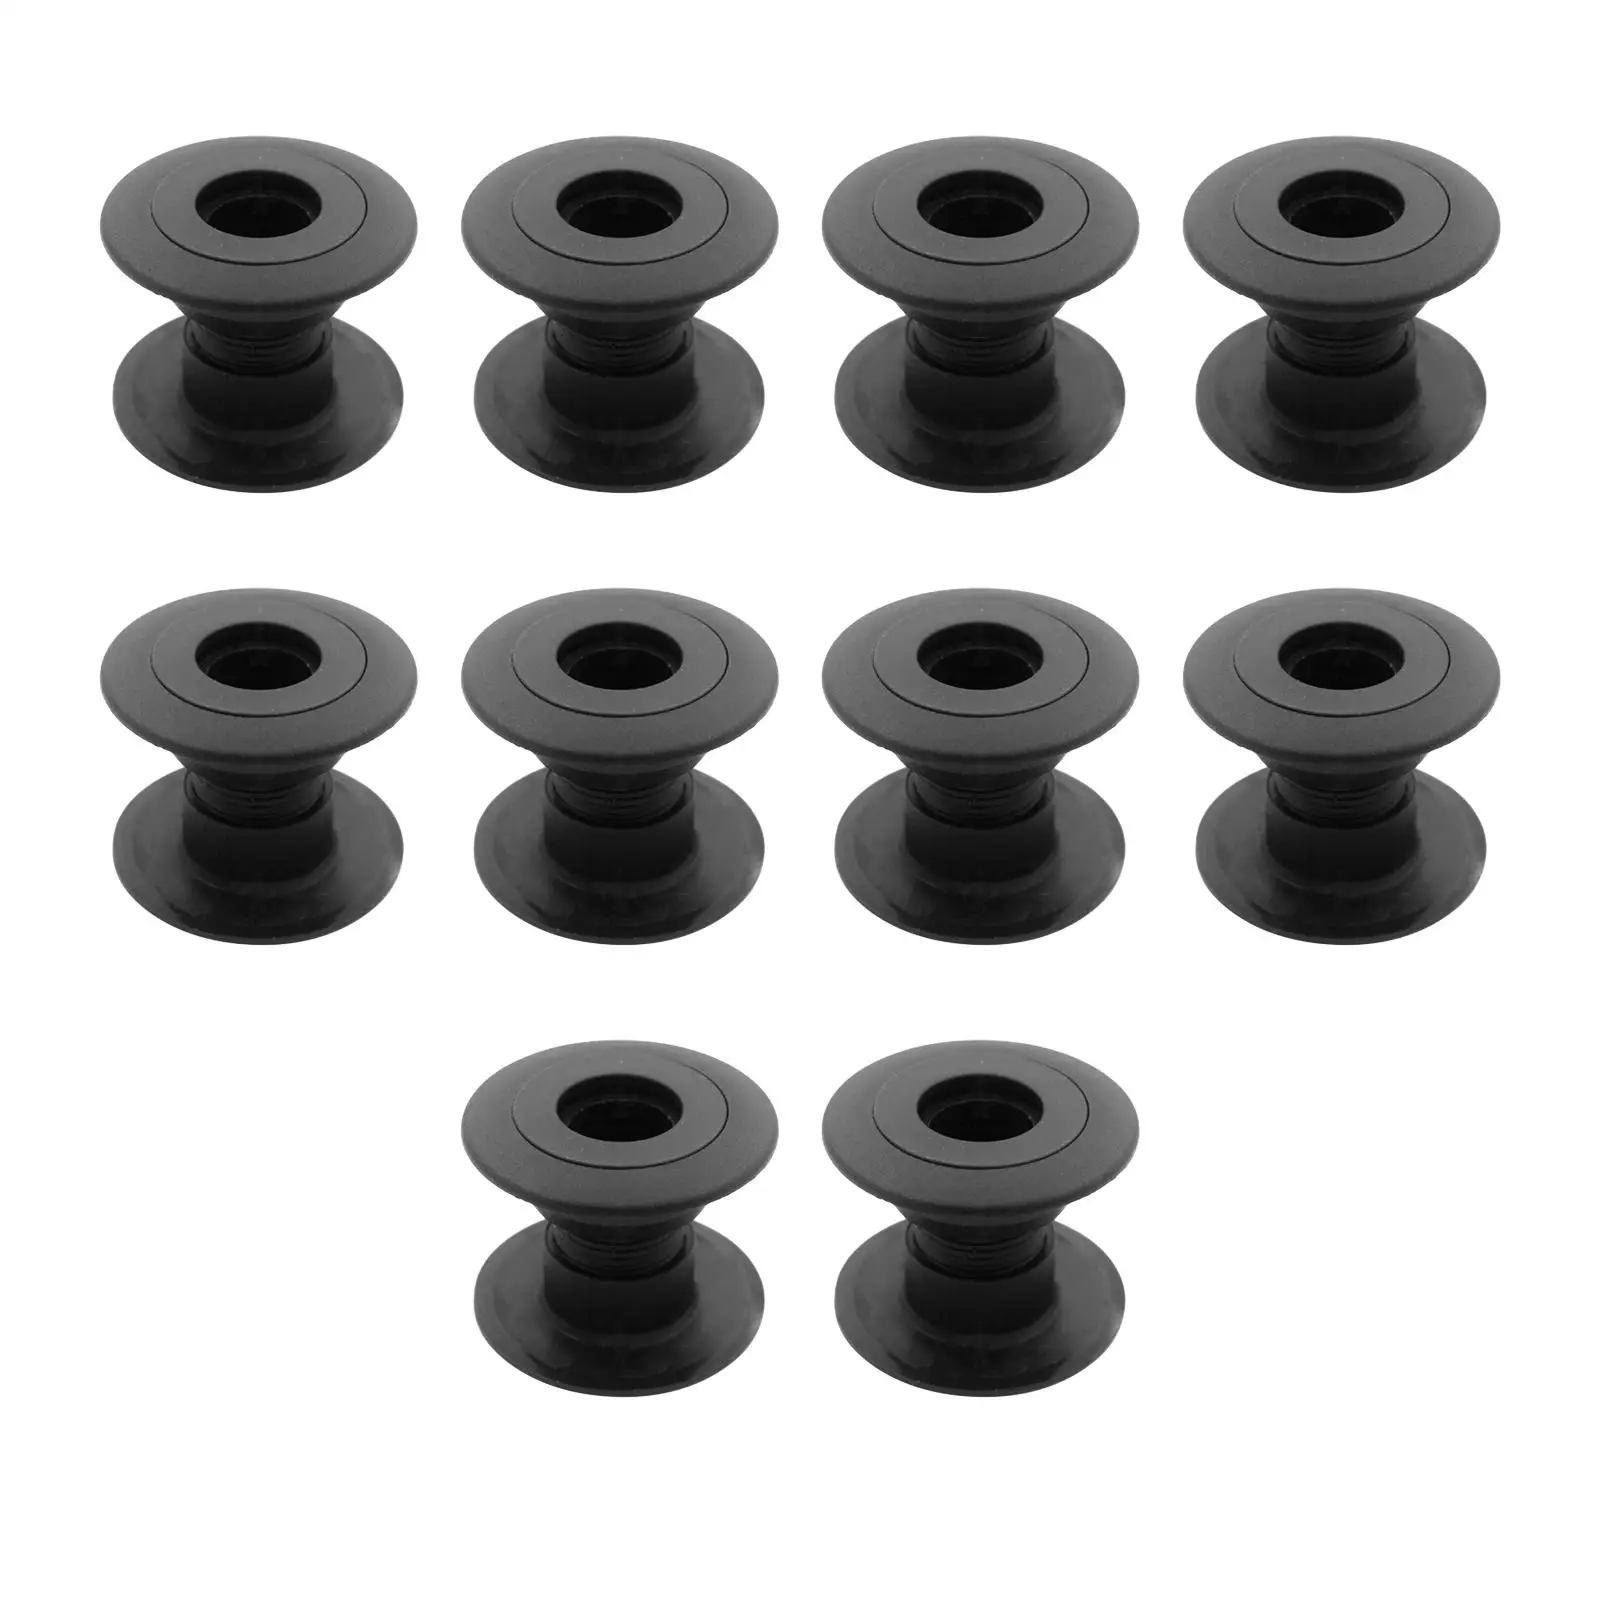 Foosball Bearing Rods for Standard Foosball Tables Durable Games Accessories